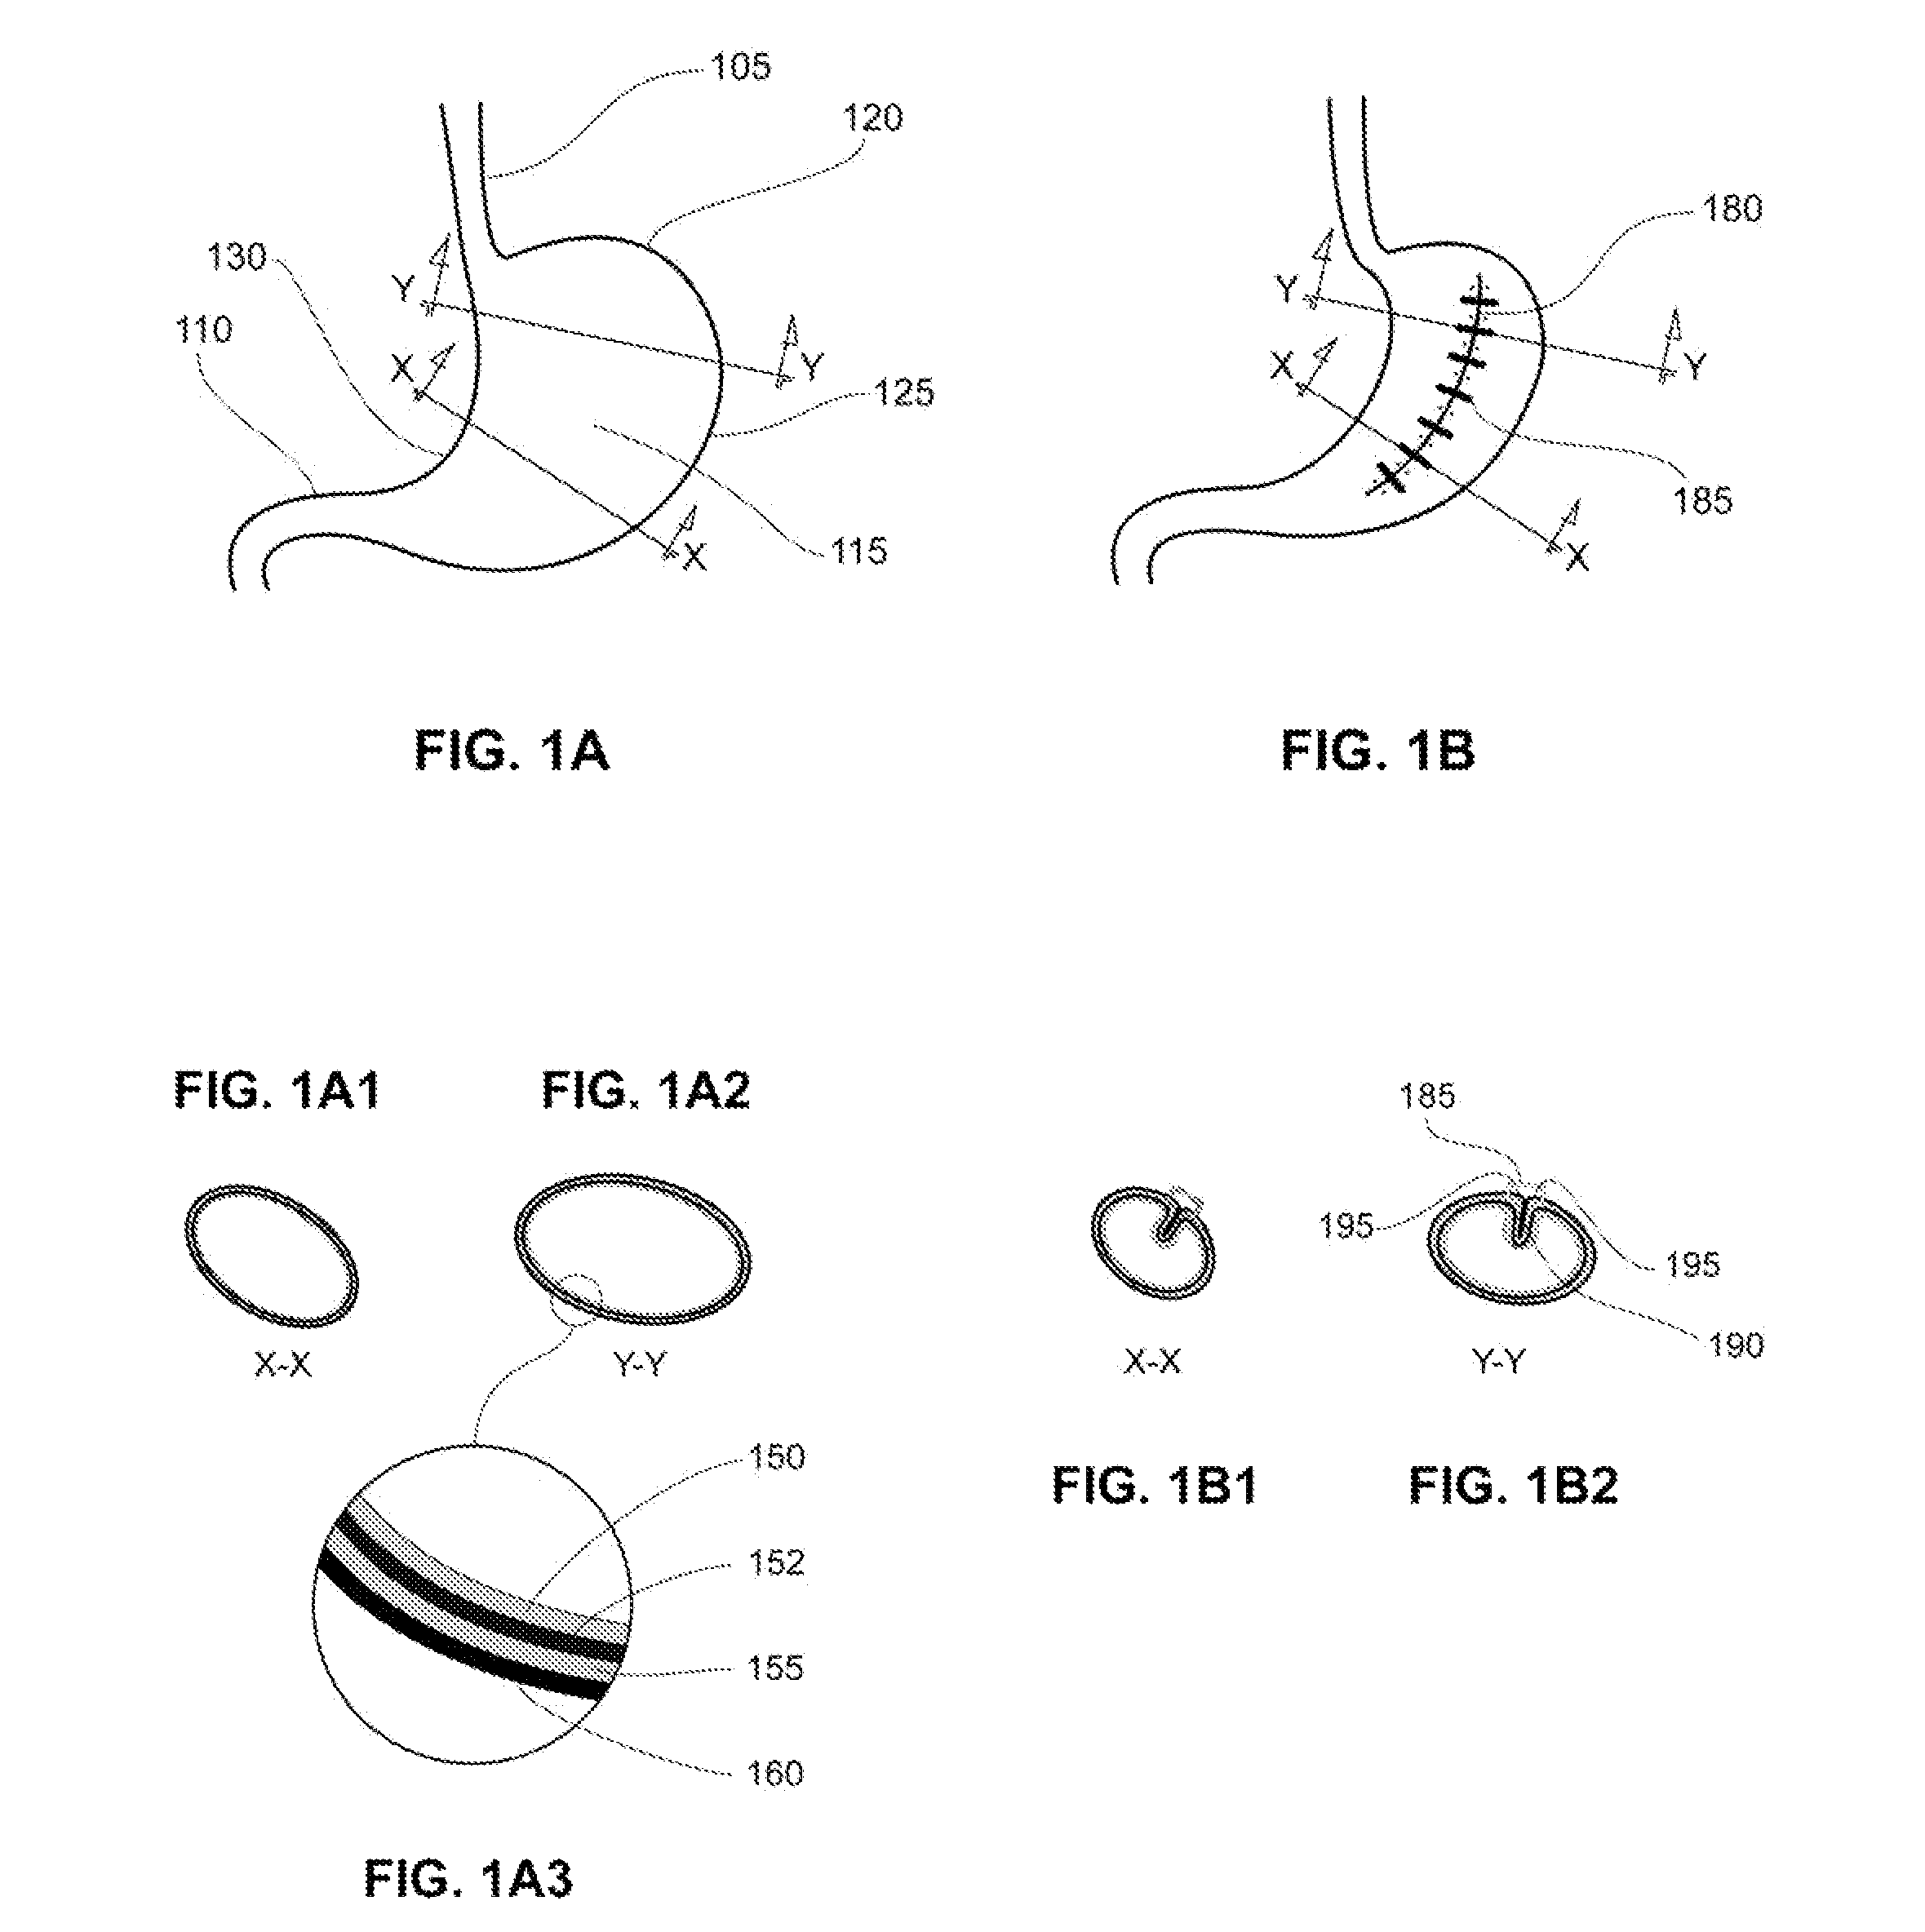 Devices for engaging, approximating and fastening tissue